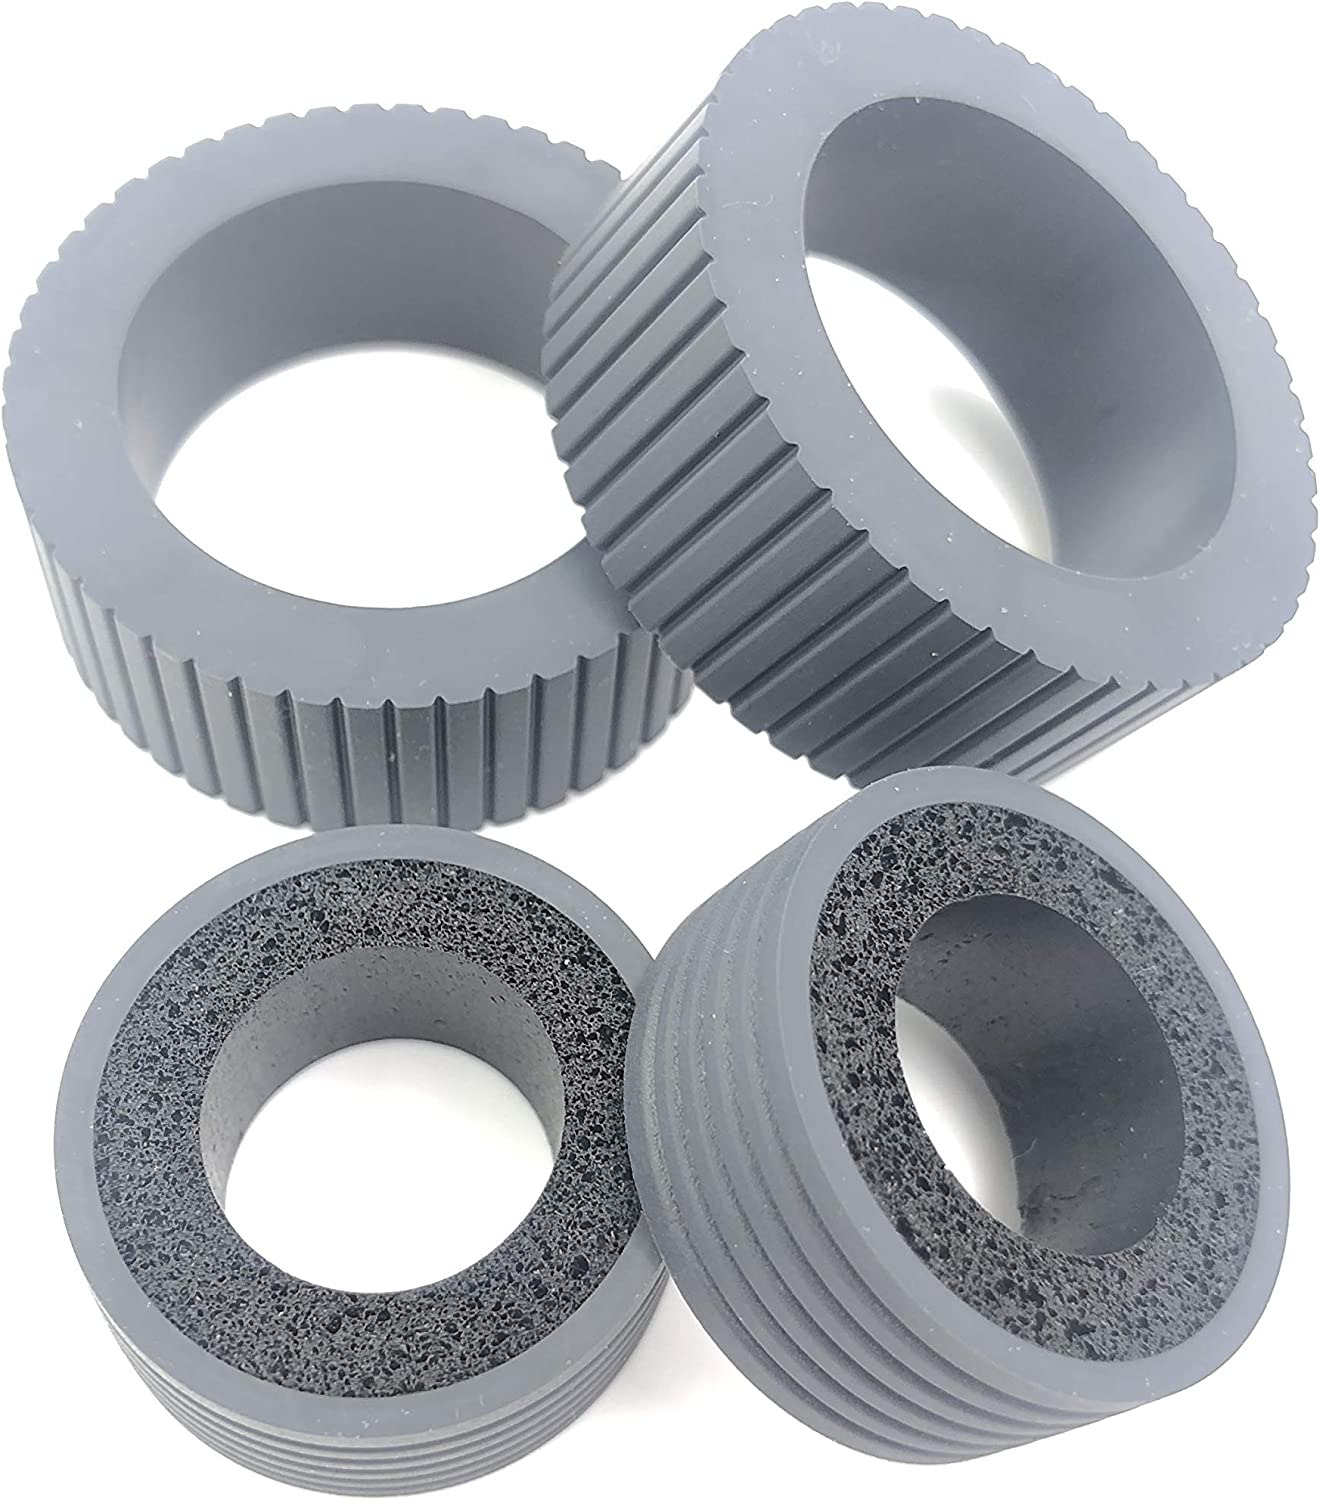 PA03540-0001 PA03540-0002 Brake and Pick Pickup Roller Tire Kit Compatible with 